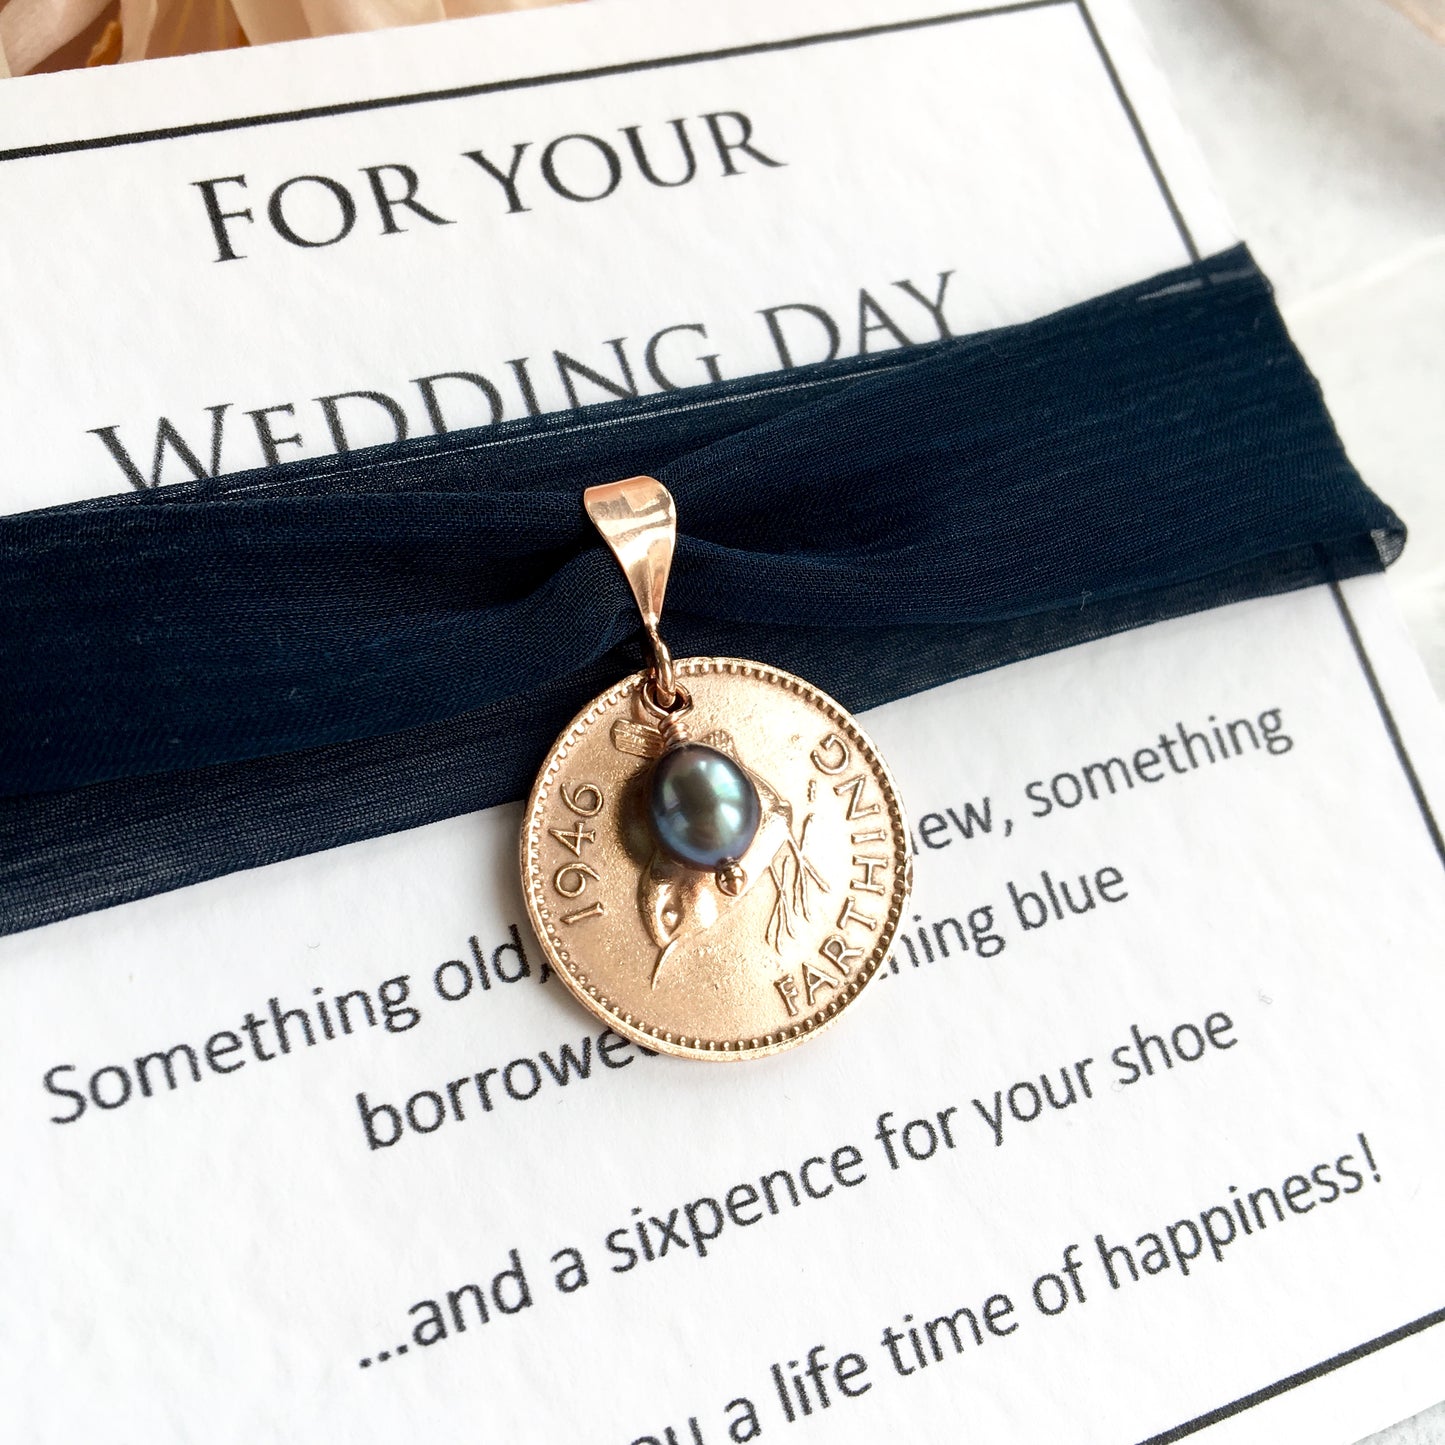 Something Old, New, Borrowed and Navy Blue Farthing Bridal Charm